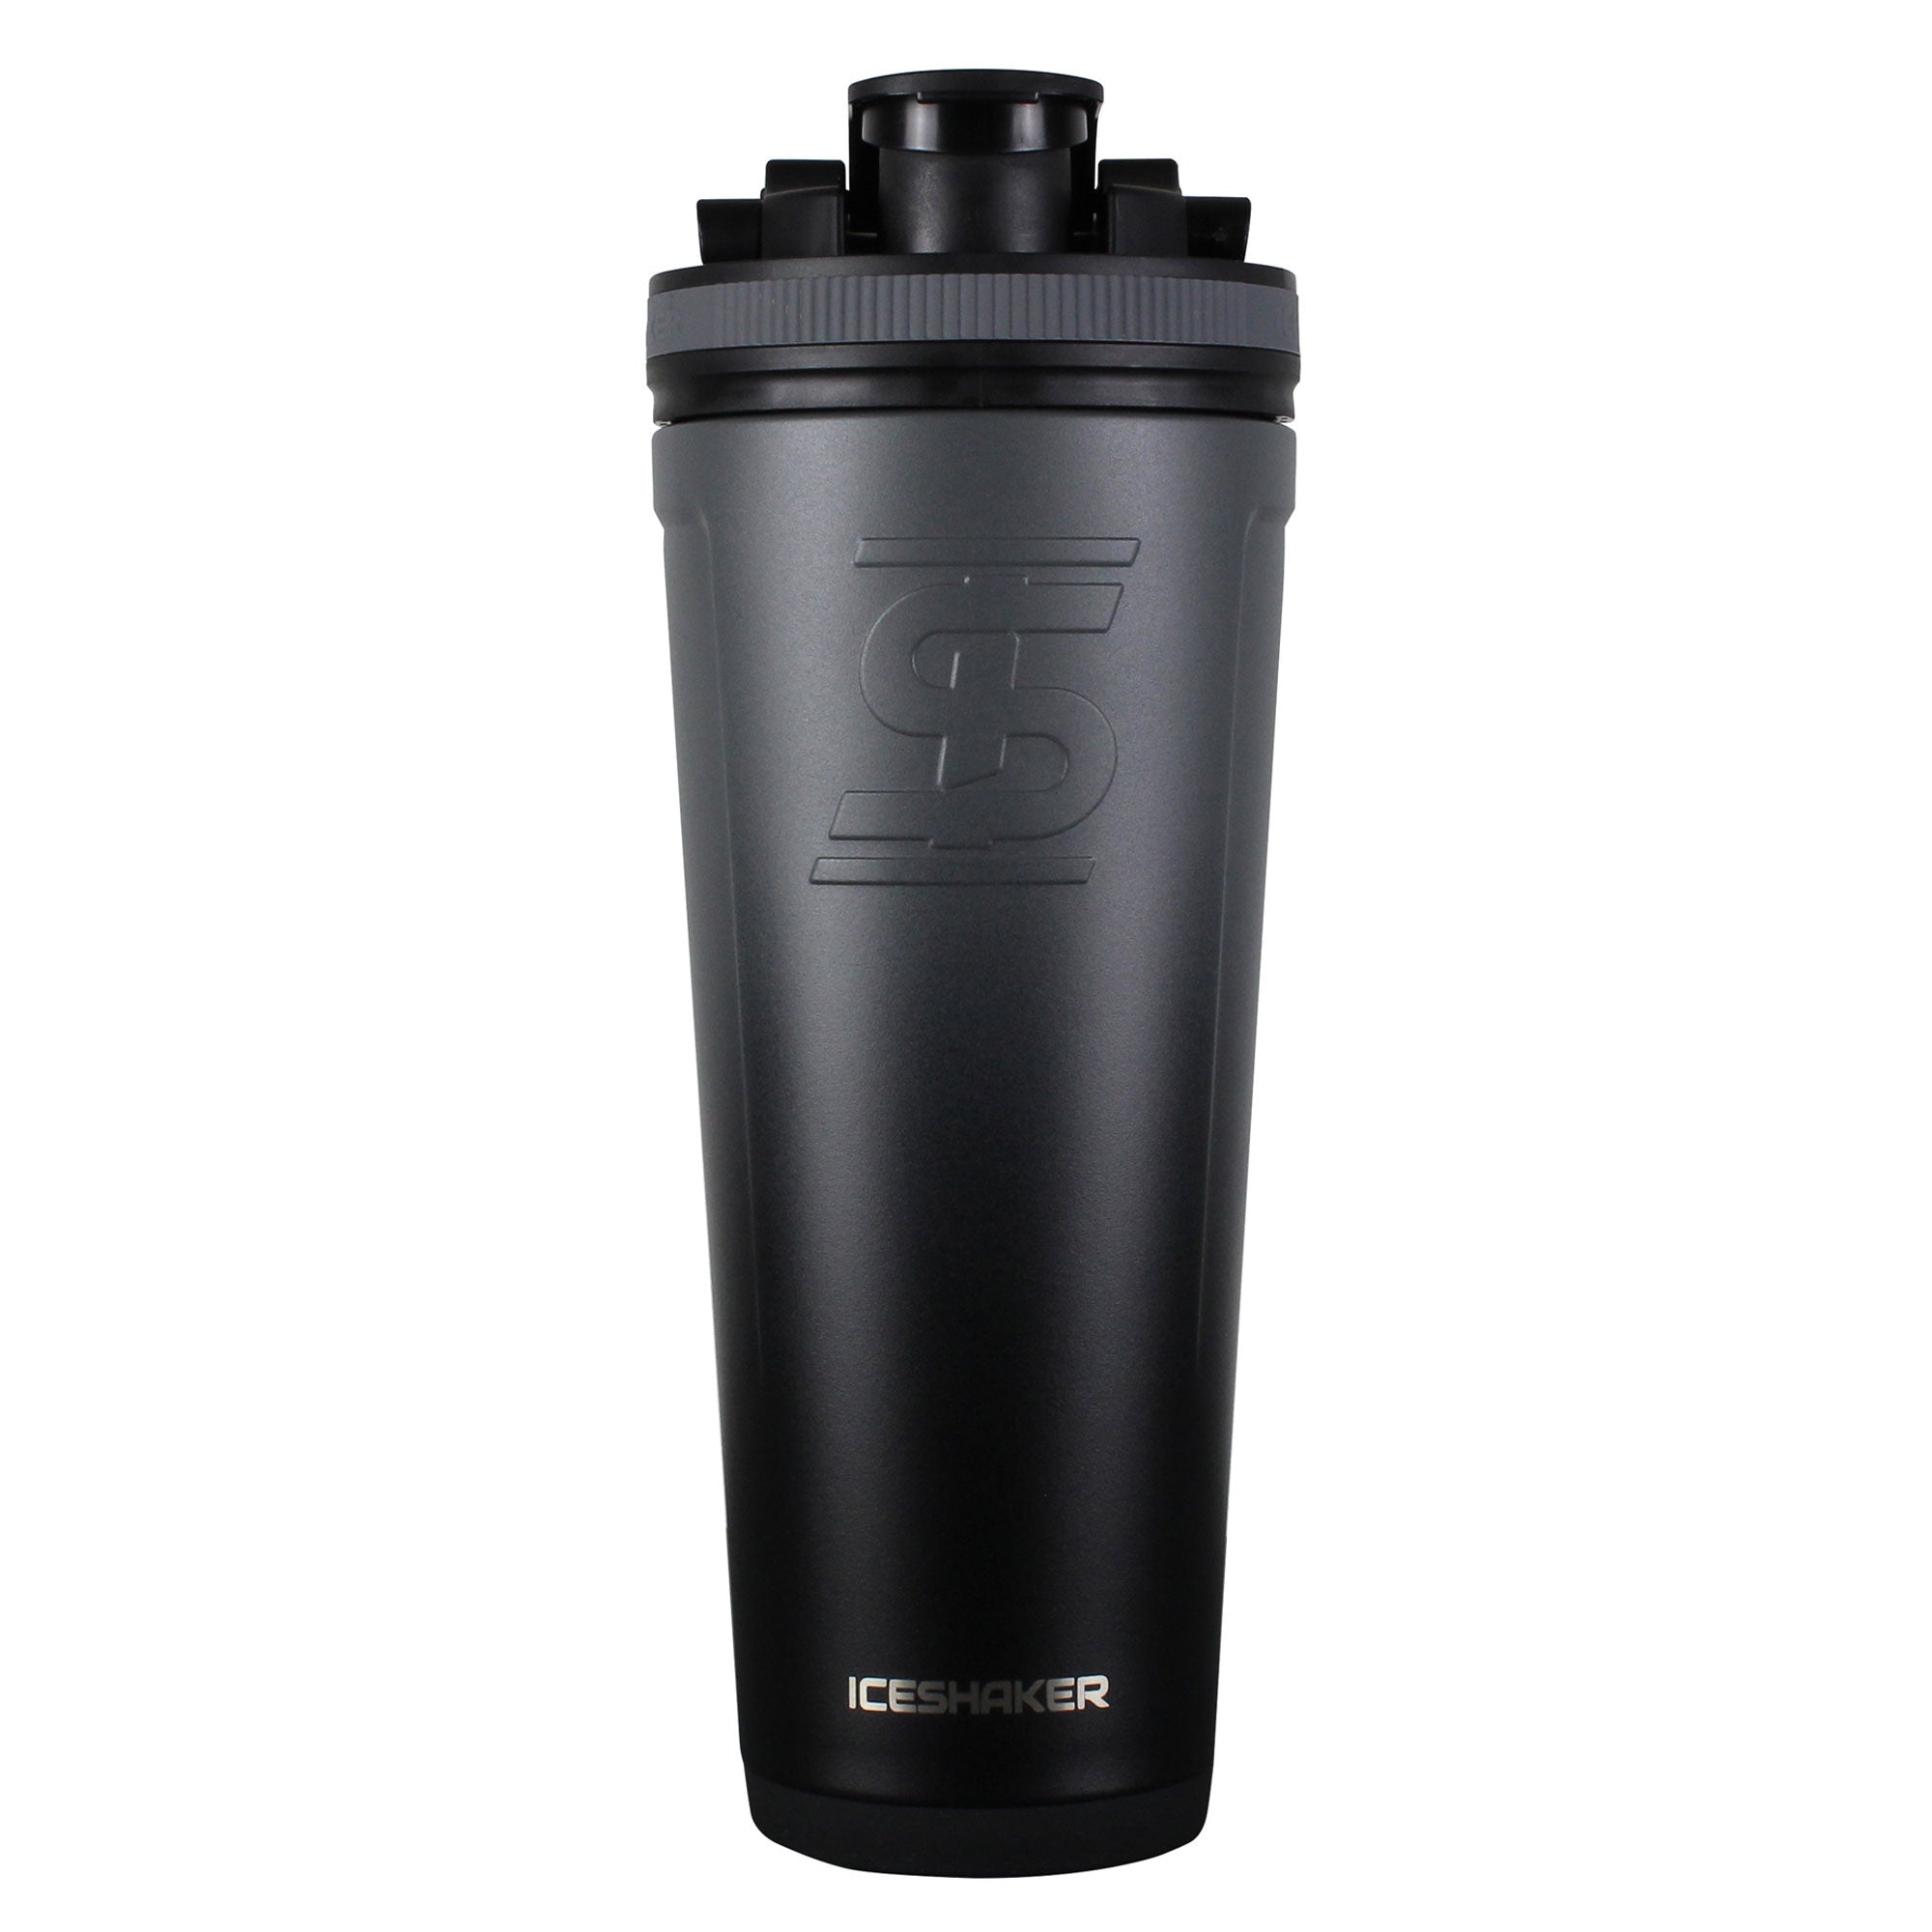 Shaker Bottle in Dark Black - A Small Cup Printed Scale Marks of 12 OZ &  400 ML